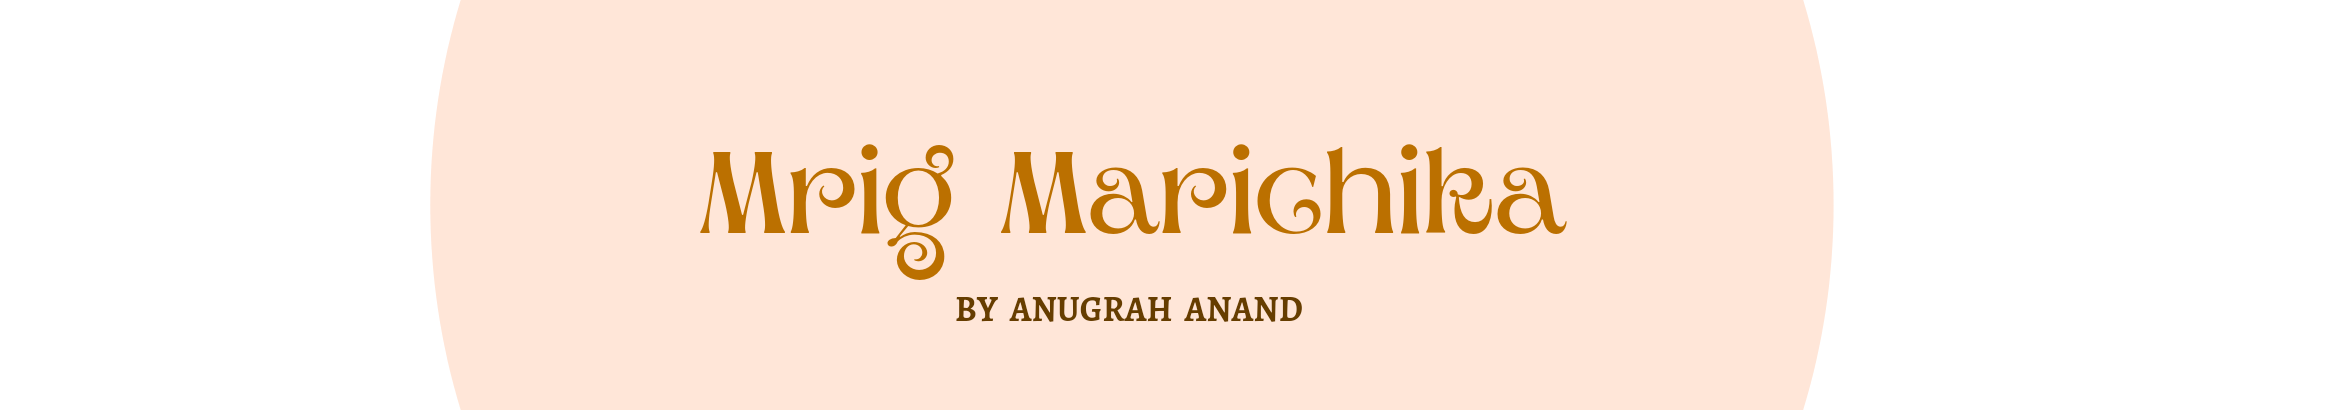 Anugrah Anand's profile banner